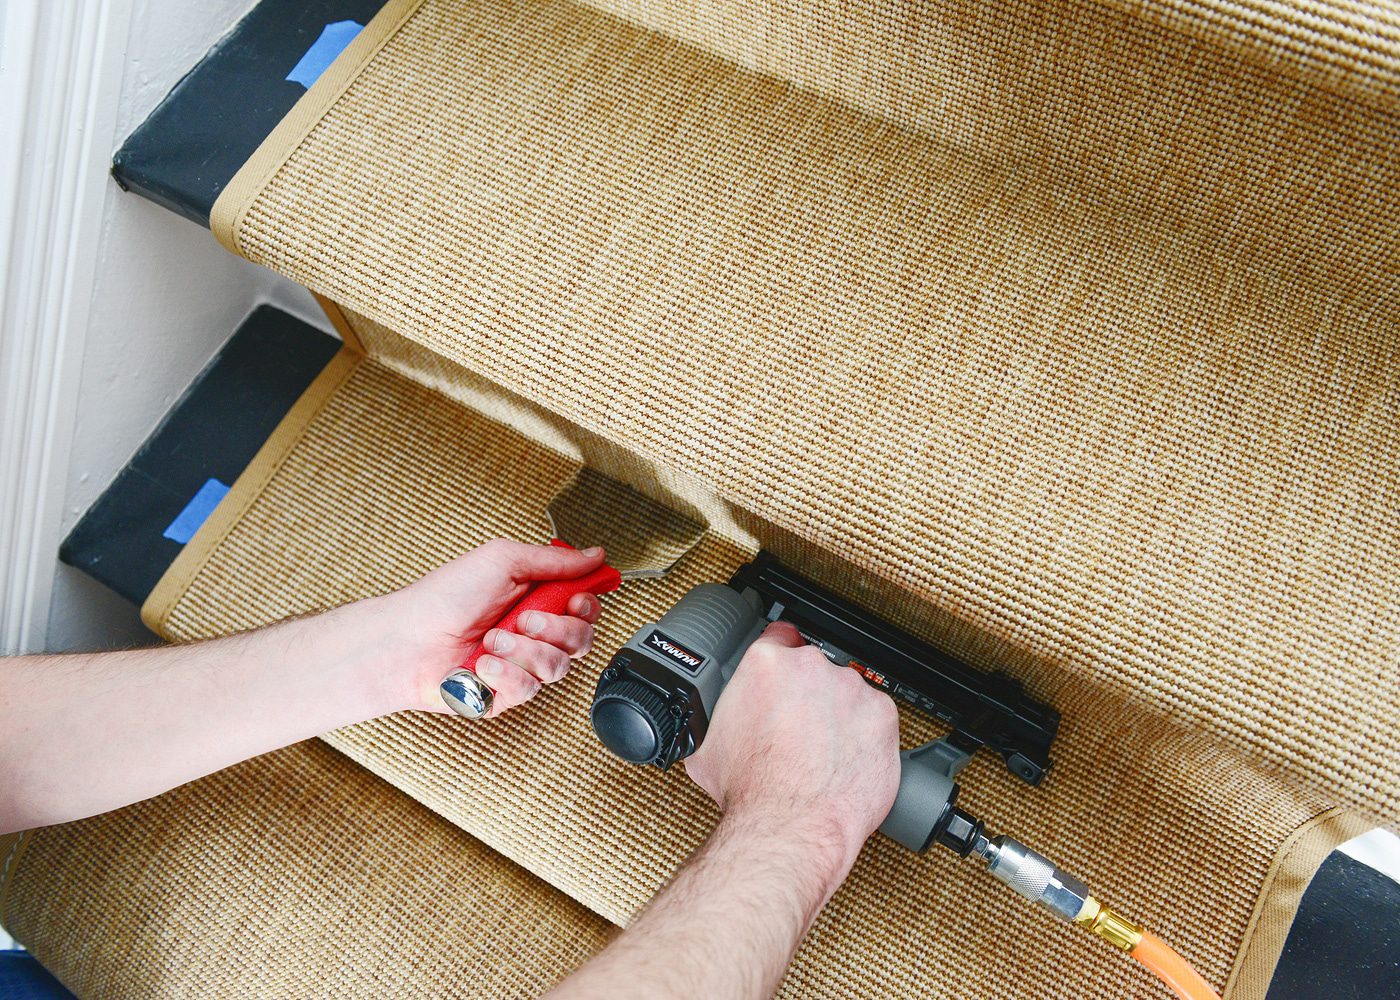 A bolster chisel and nailer are key to installing a stair runner | How to Install a Stair Runner in 10 Steps via Yellow Brick Home